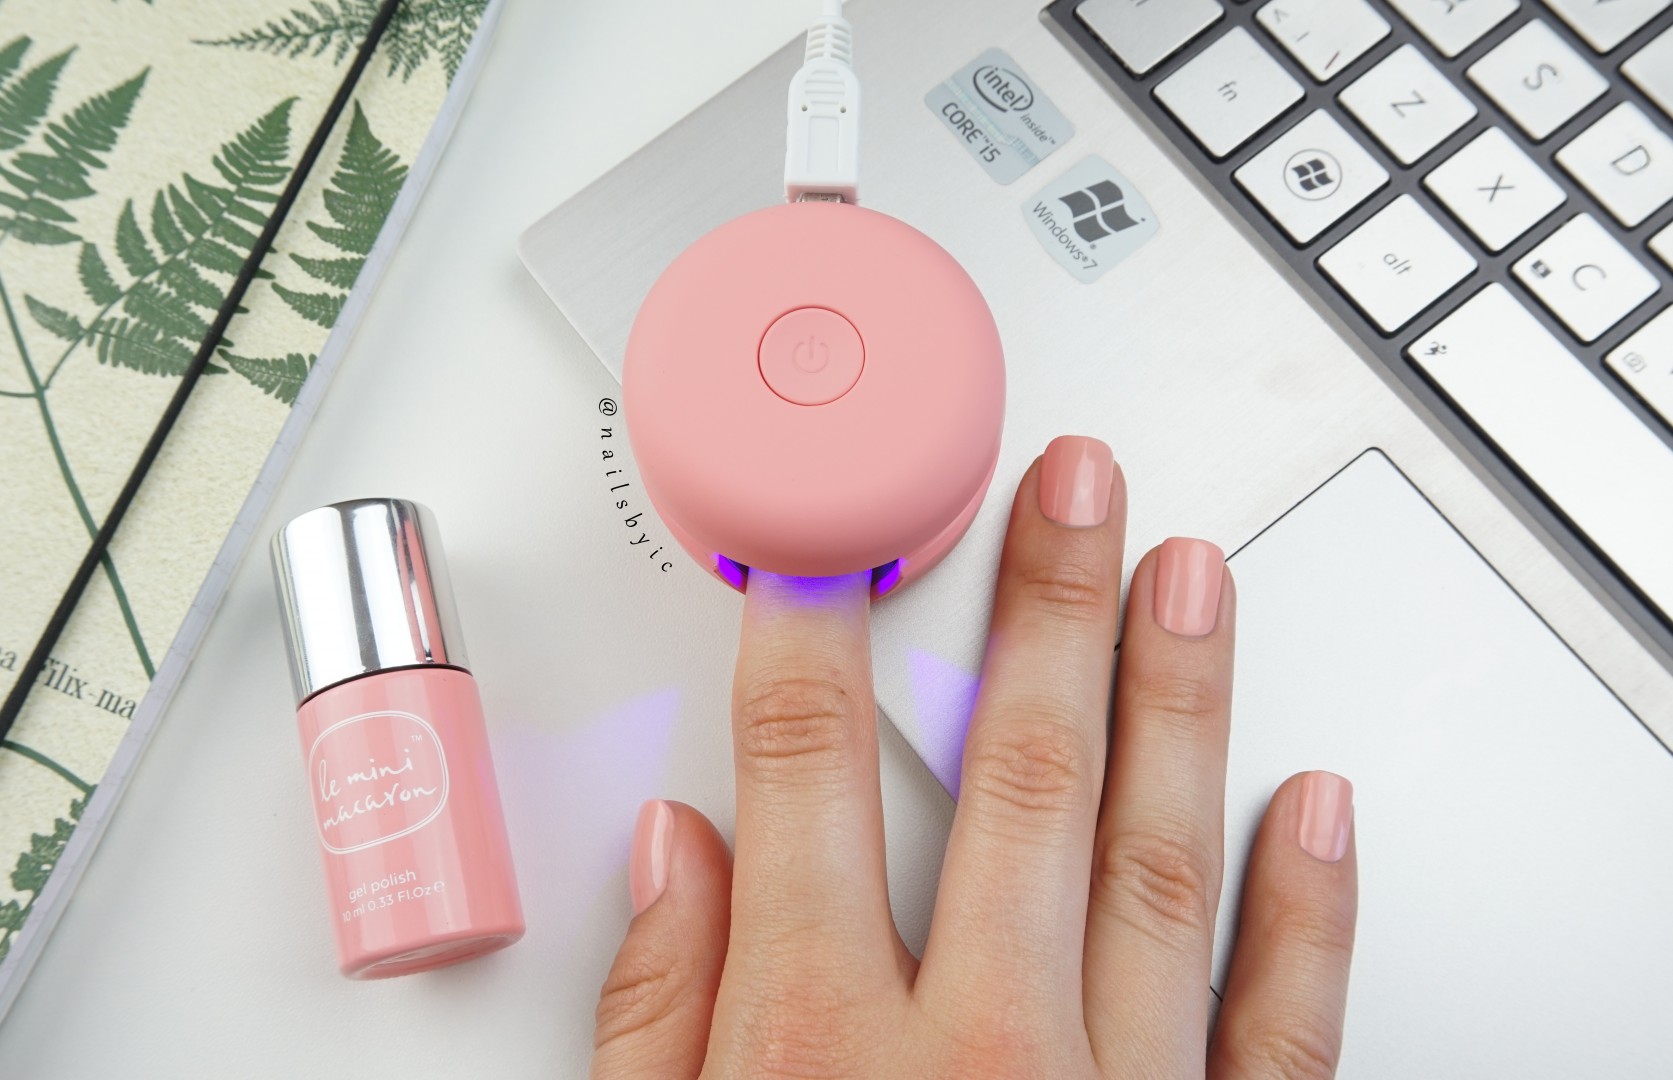 best led nail lamps